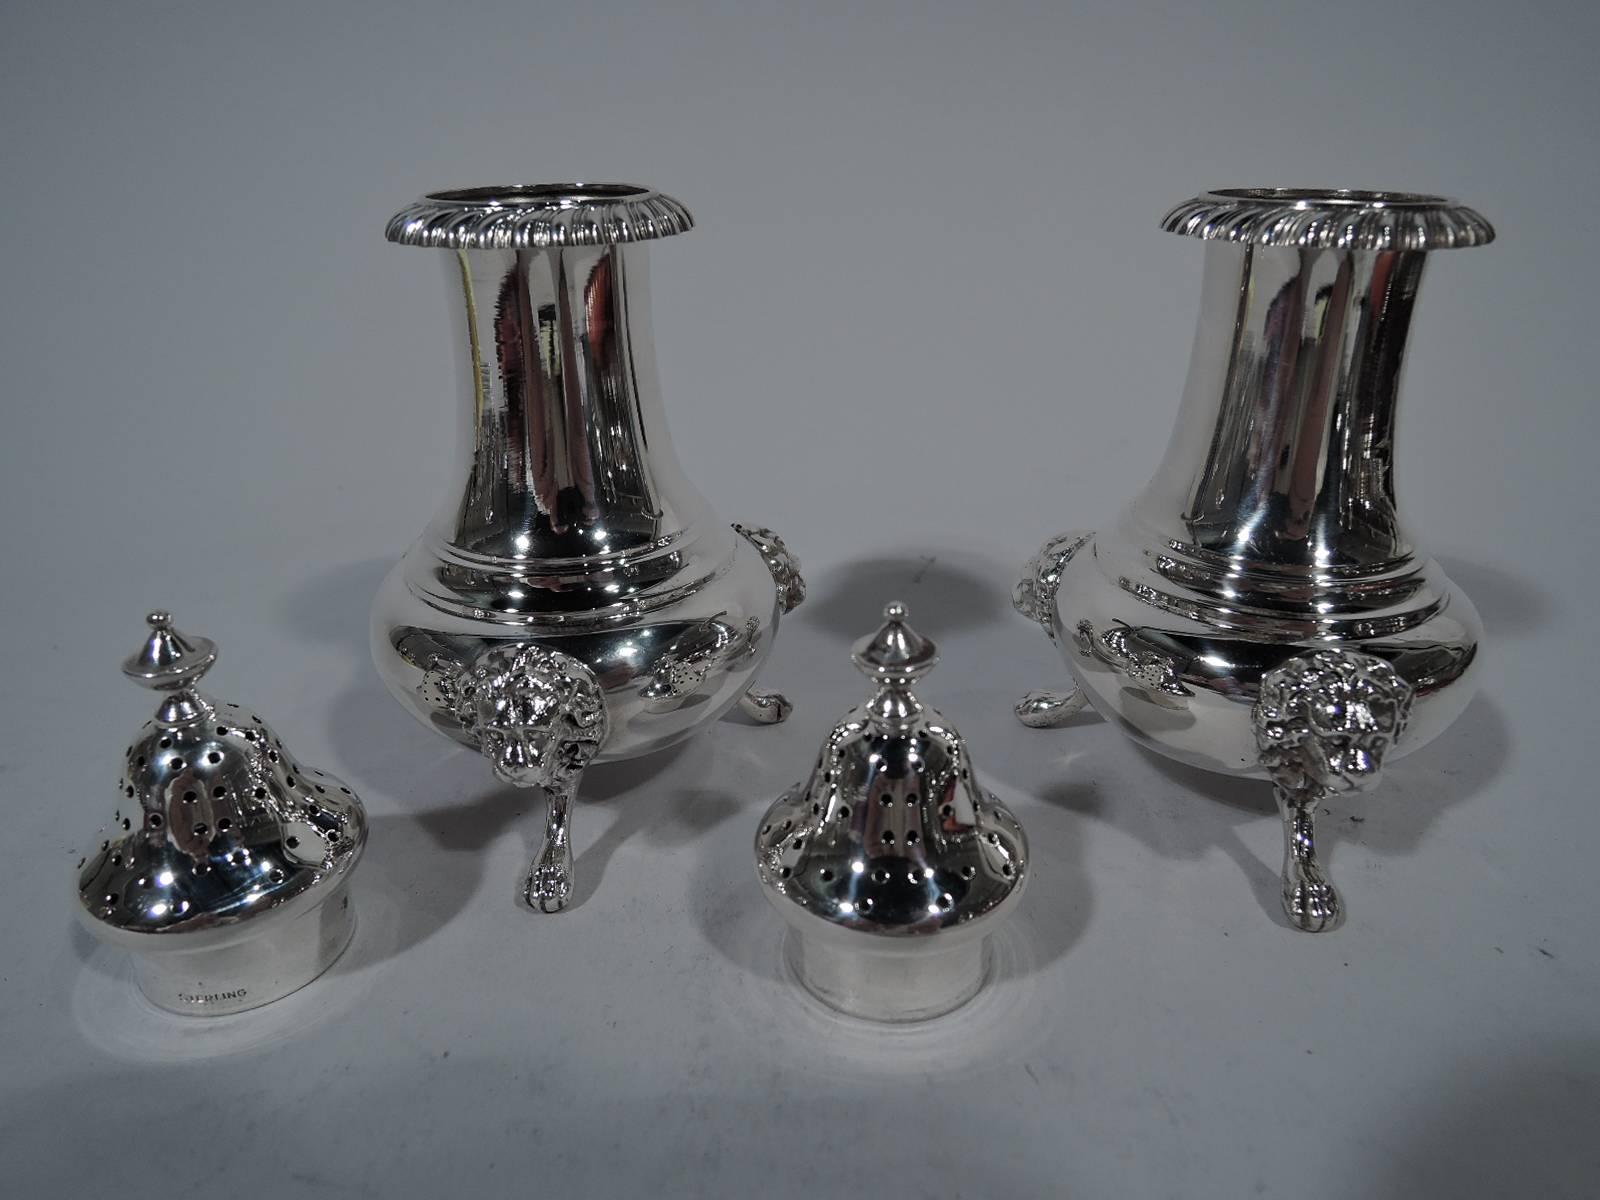 Neoclassical Revival Pair of Antique Gorham Neoclassical Sterling Silver Salt and Pepper Shakers